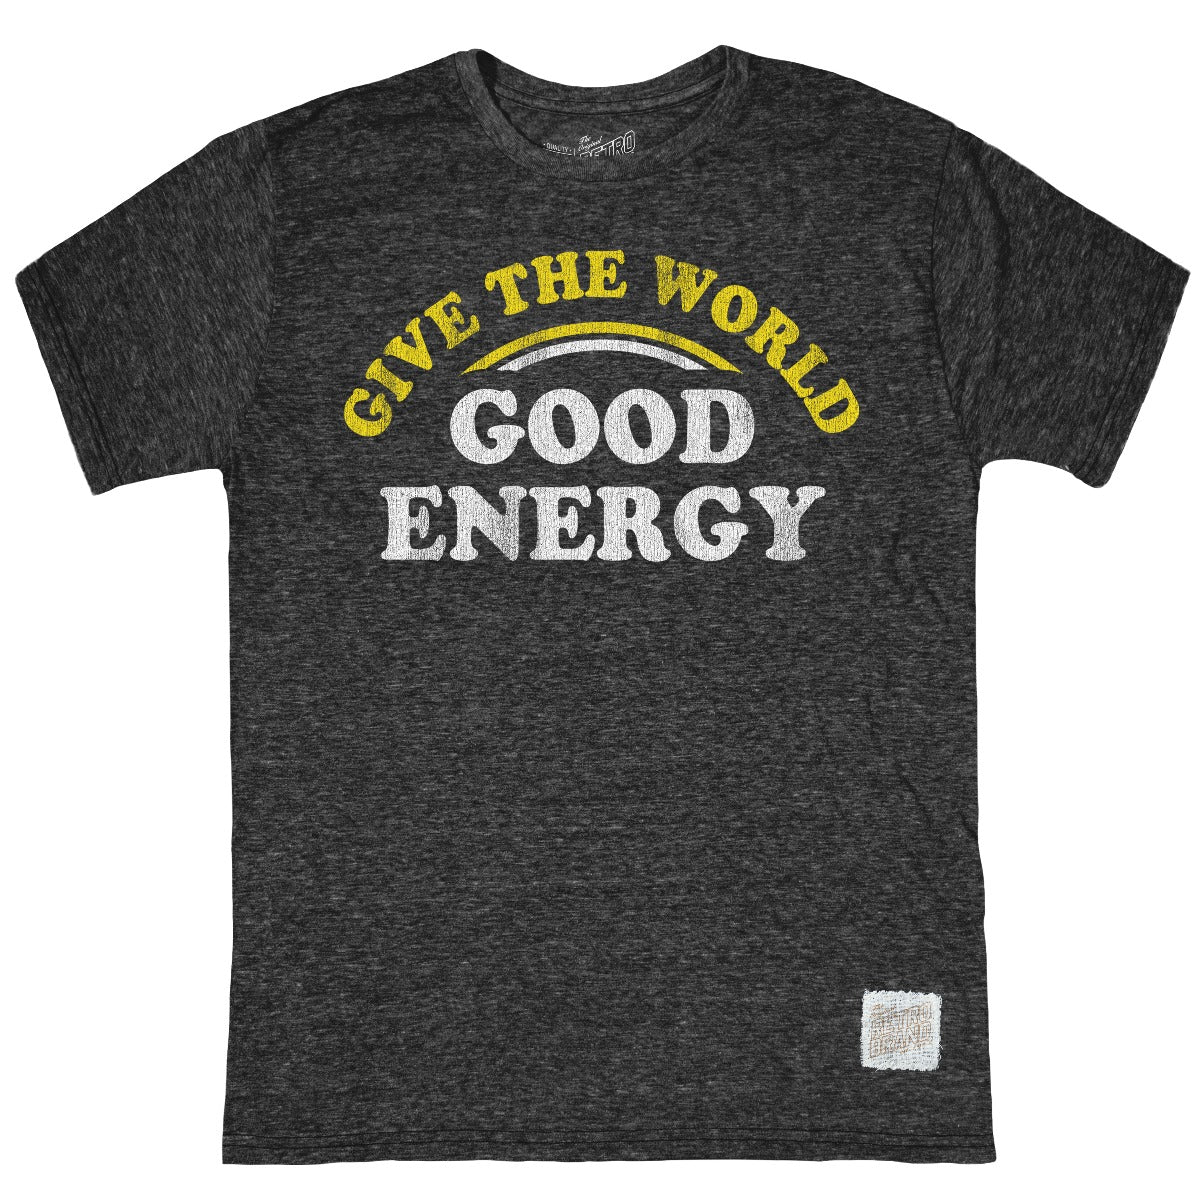 Give The World Good Energy Tri-Blend Tee